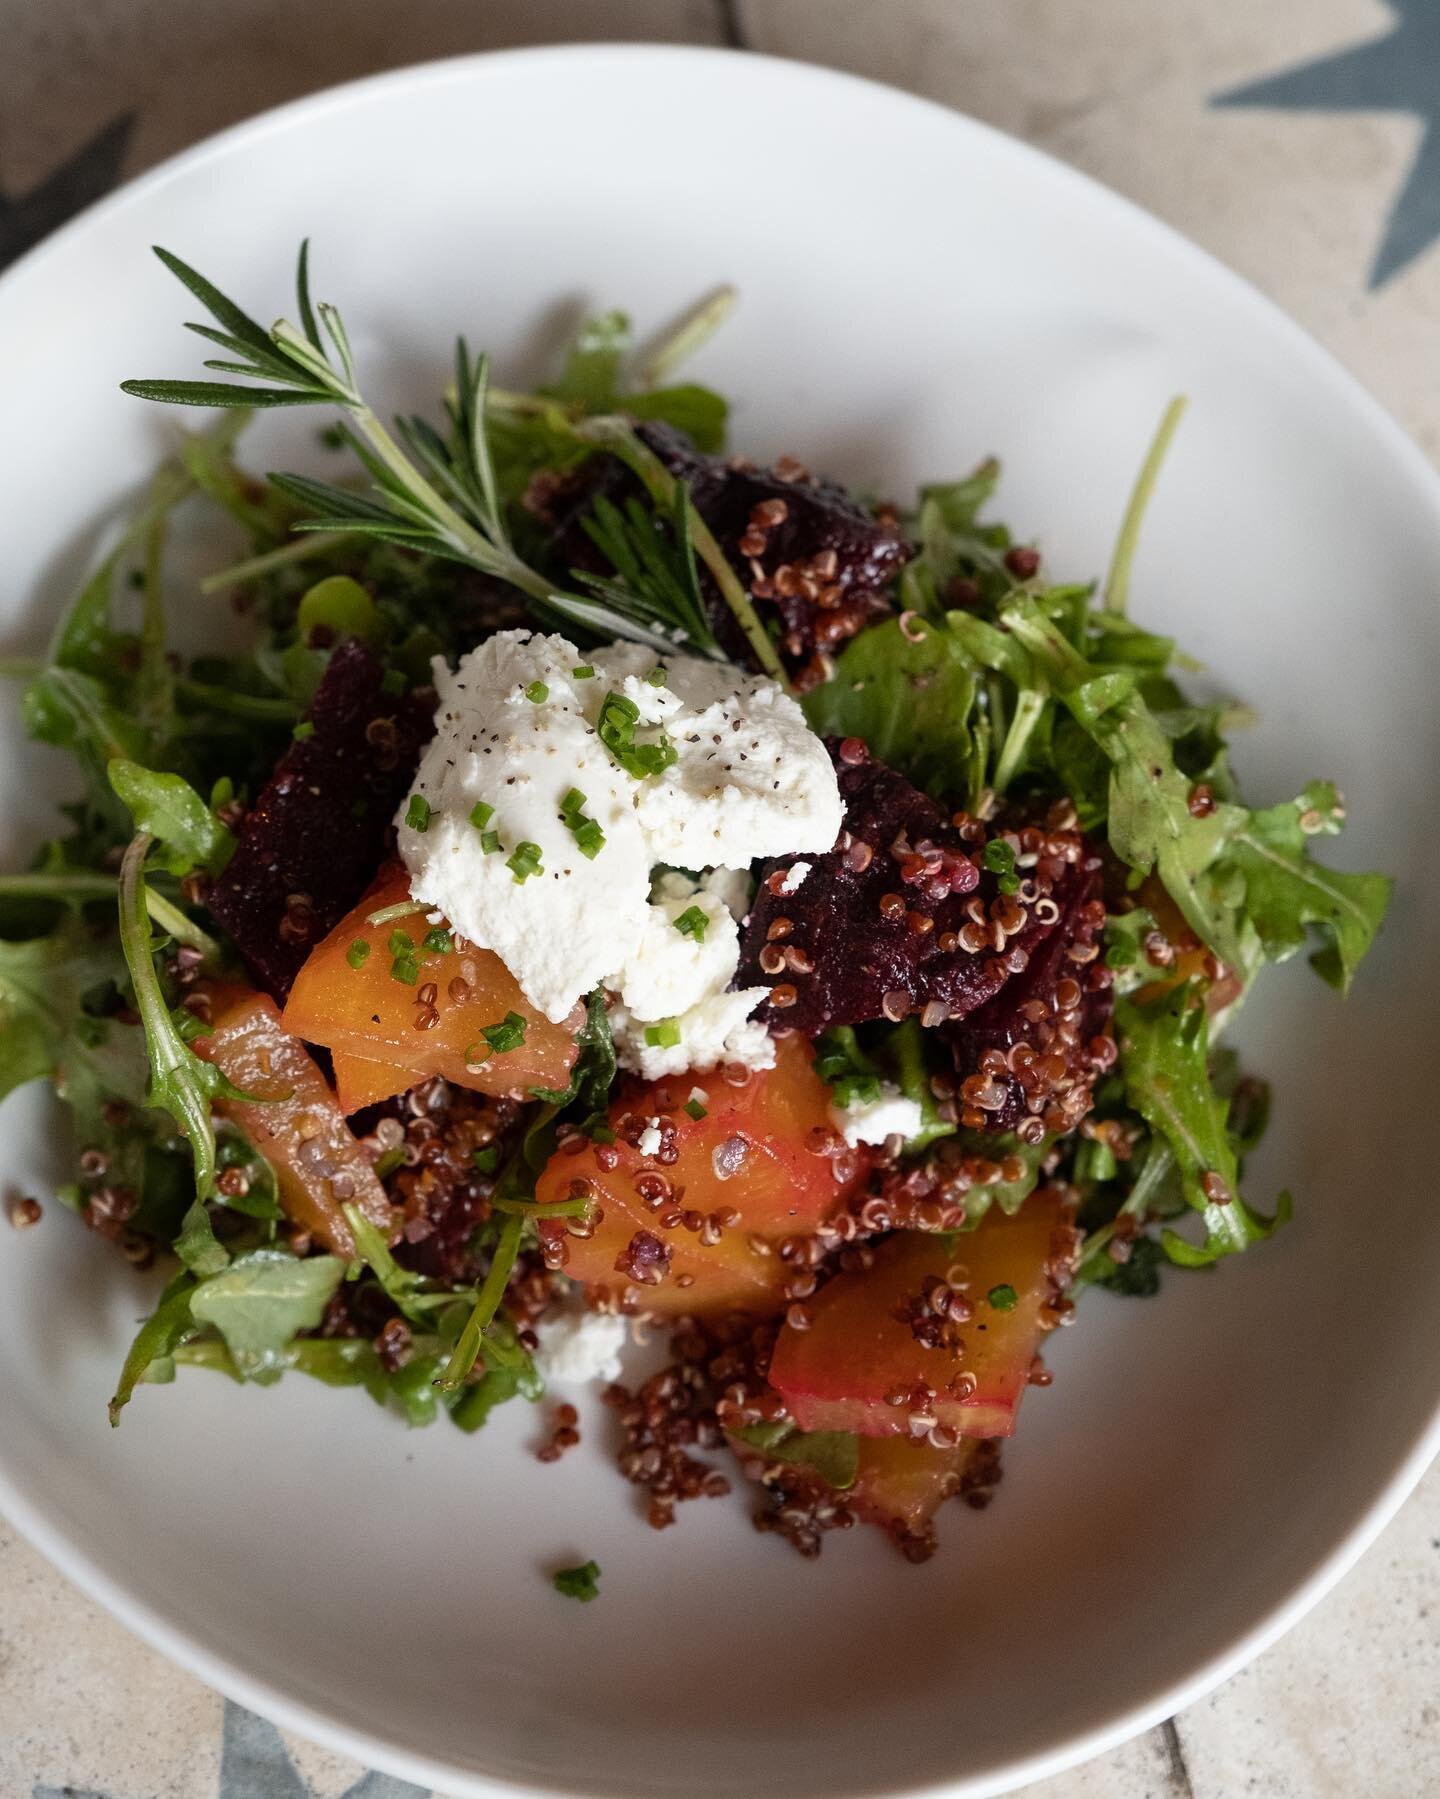 Roasted red &amp; gold beets, quinoa, arugula, goat cheese, vinaigrette // brand new and available on our lunch &amp; dinner menus starting this weekend